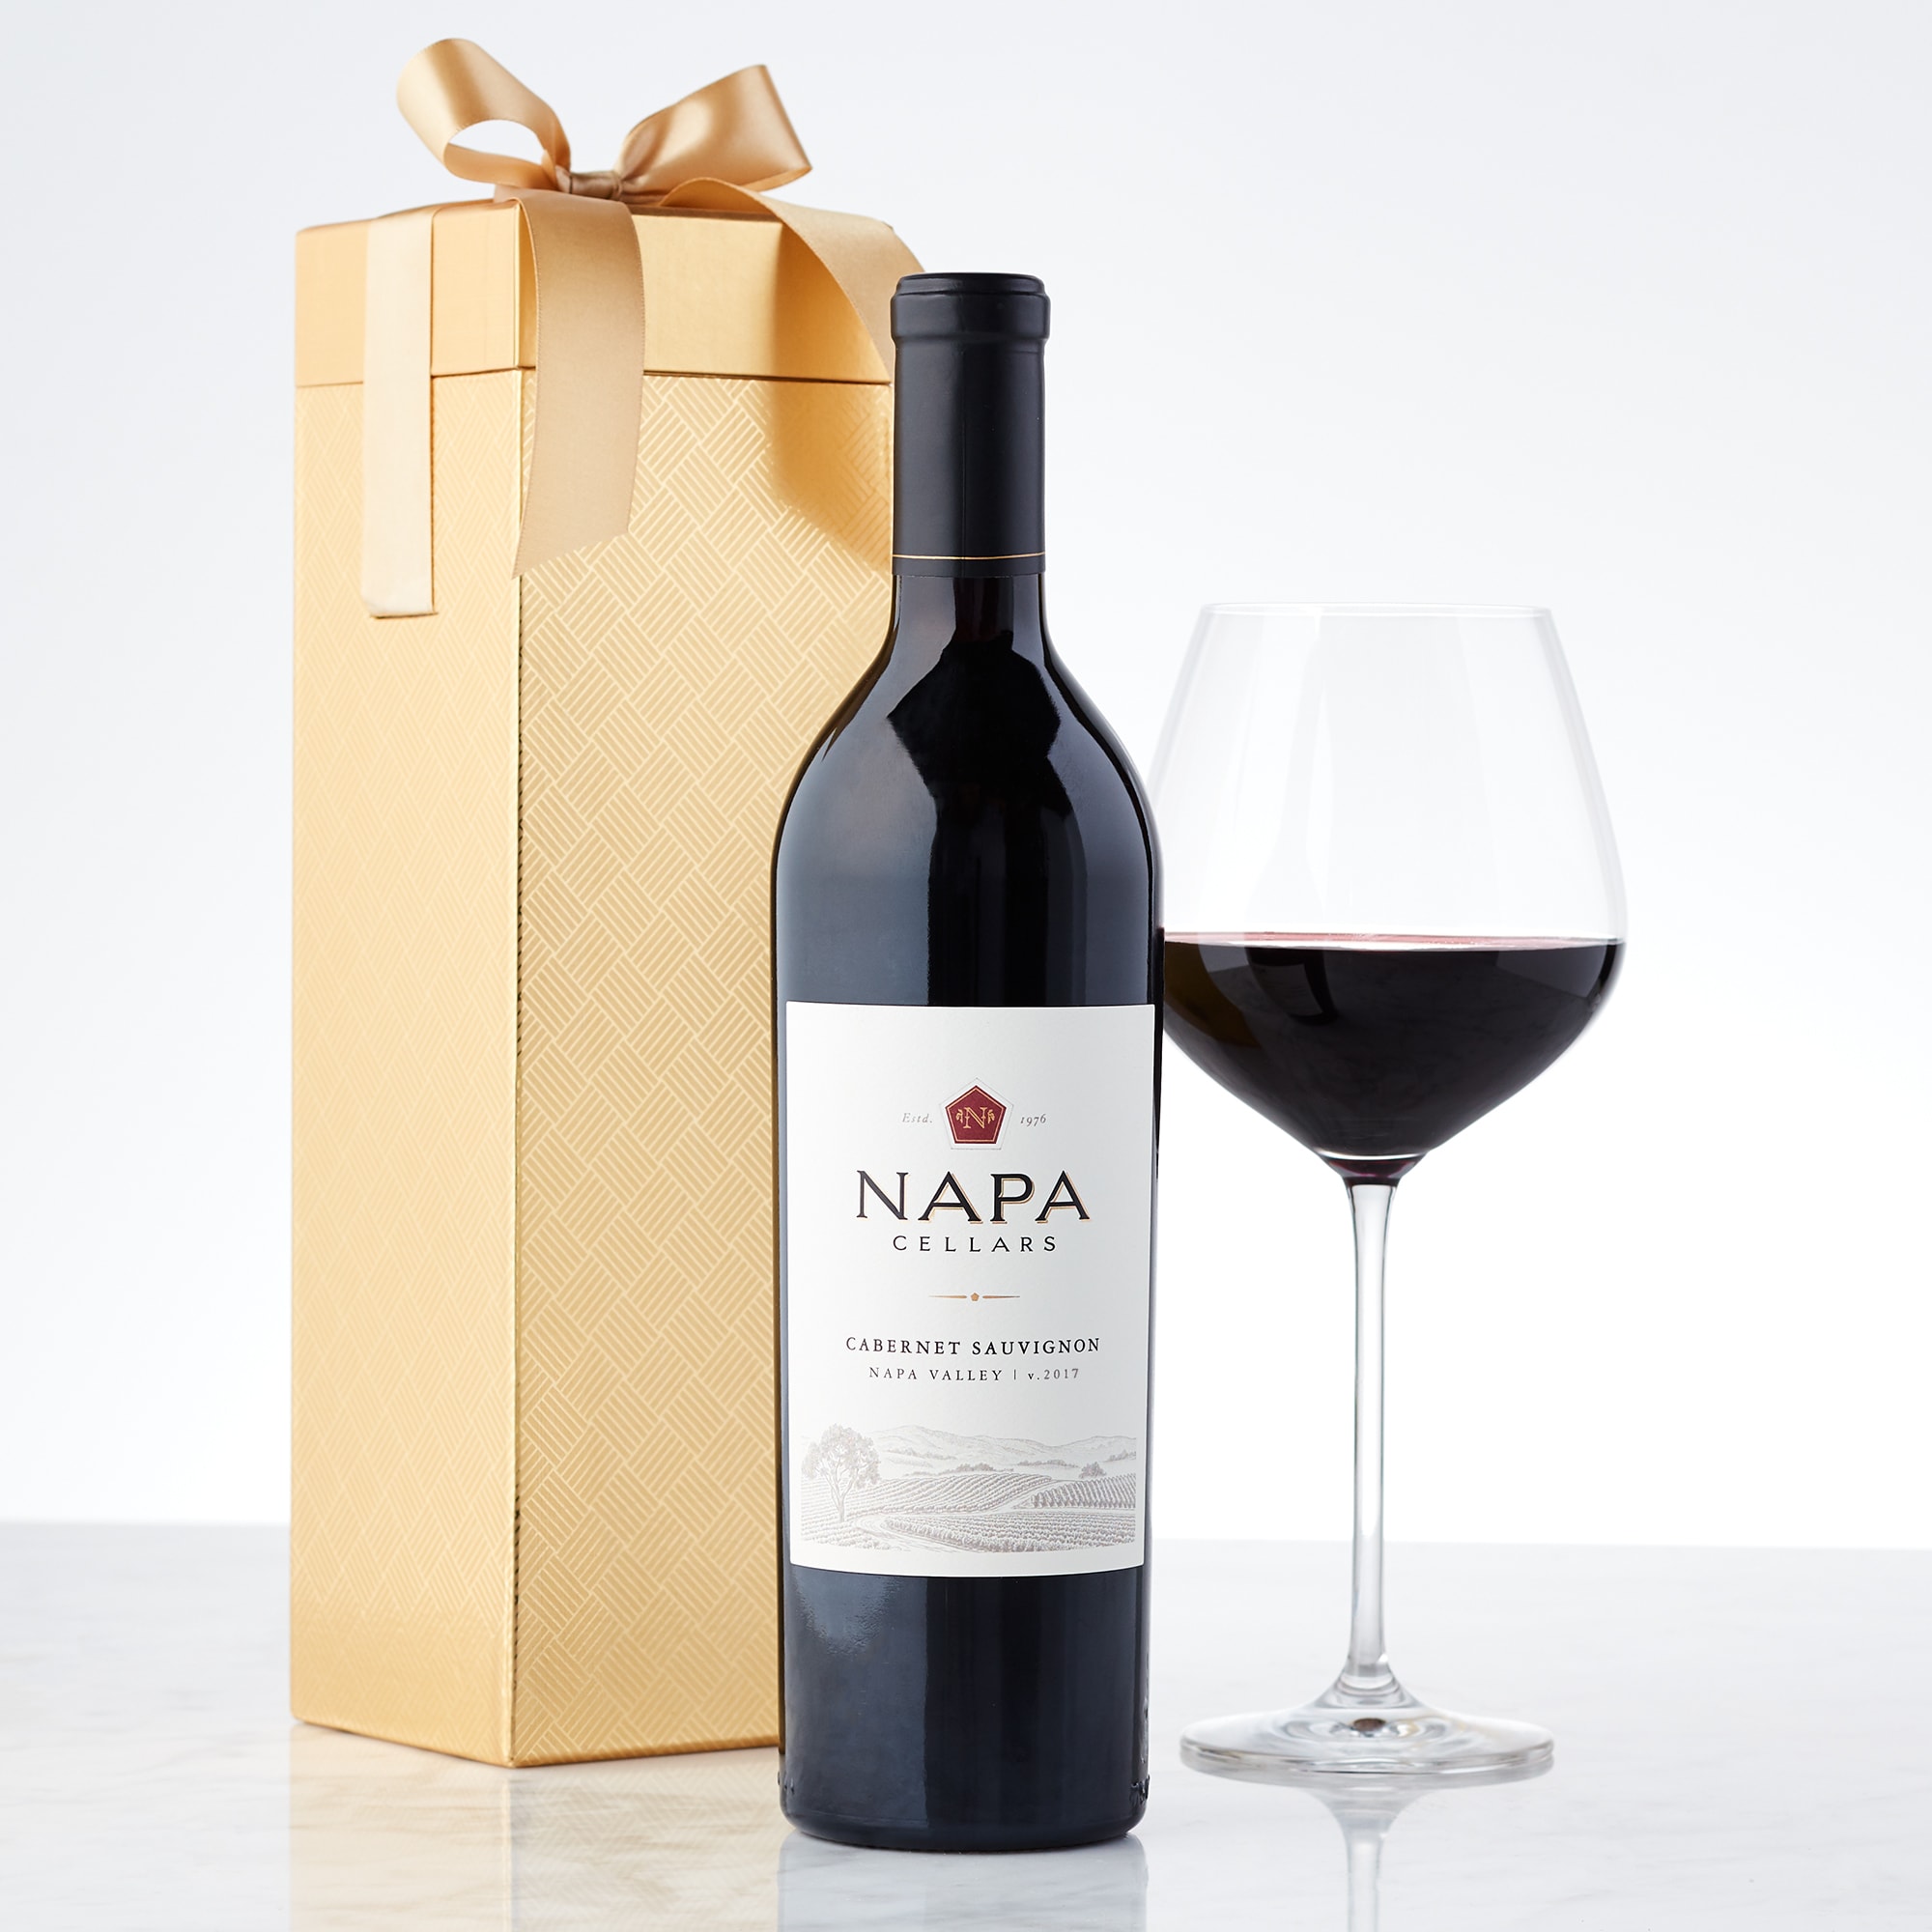 Cabernet, Chocolate, Nuts & Glasses Gift Box (At this time we cannot ship  wine to WY